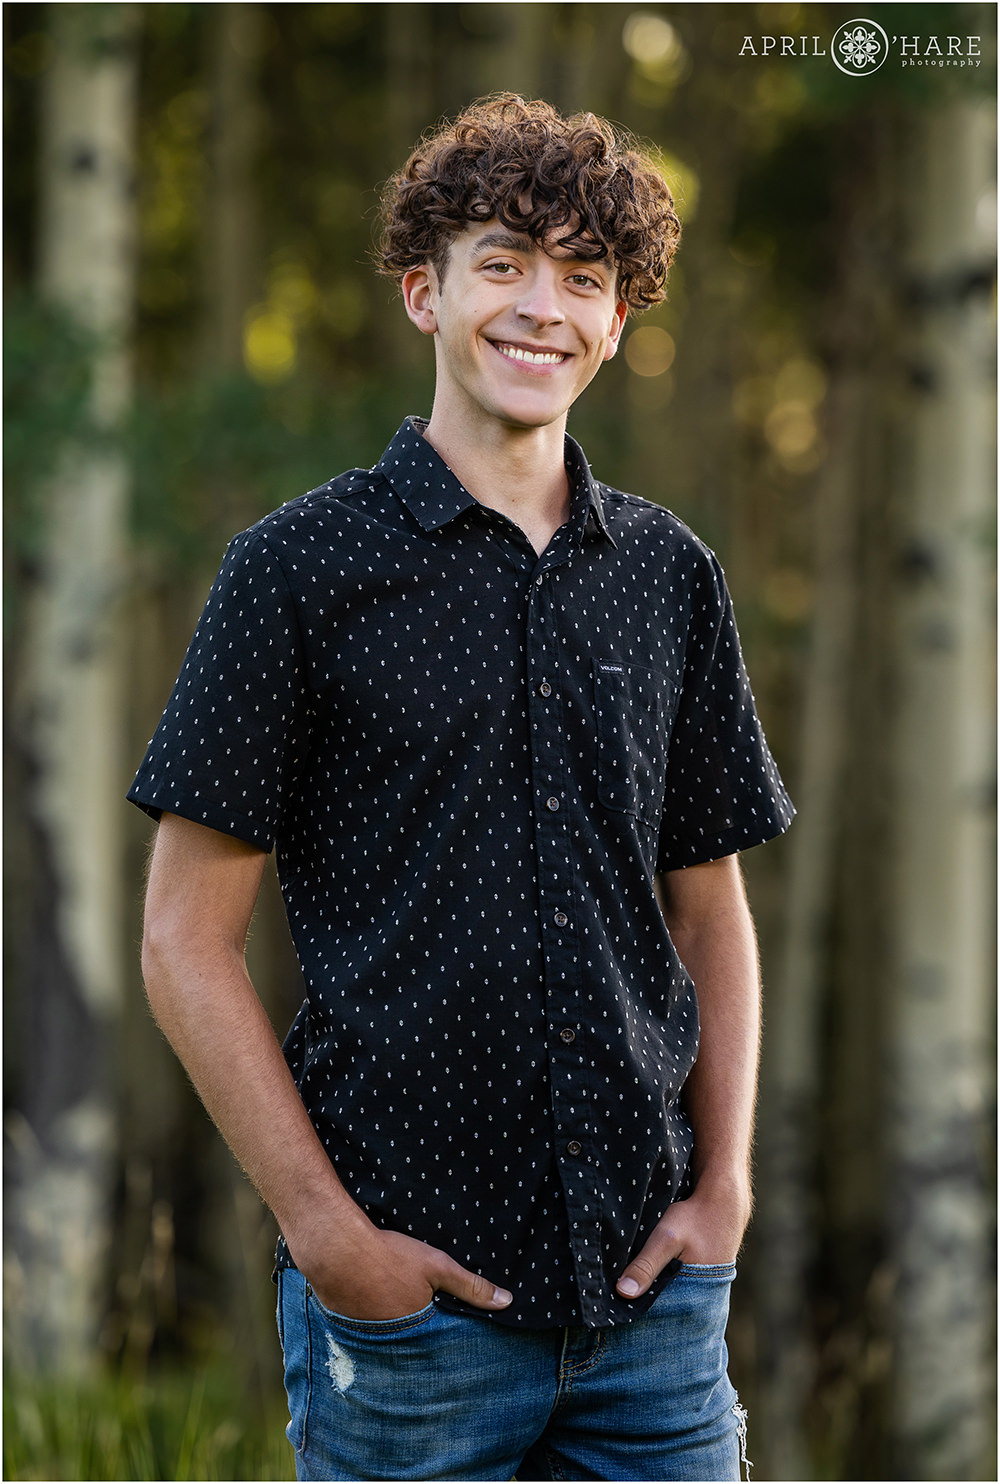 Senior boy with curly brown hair wearing a dark shirt with a dotted print on it in the woods of Colorado